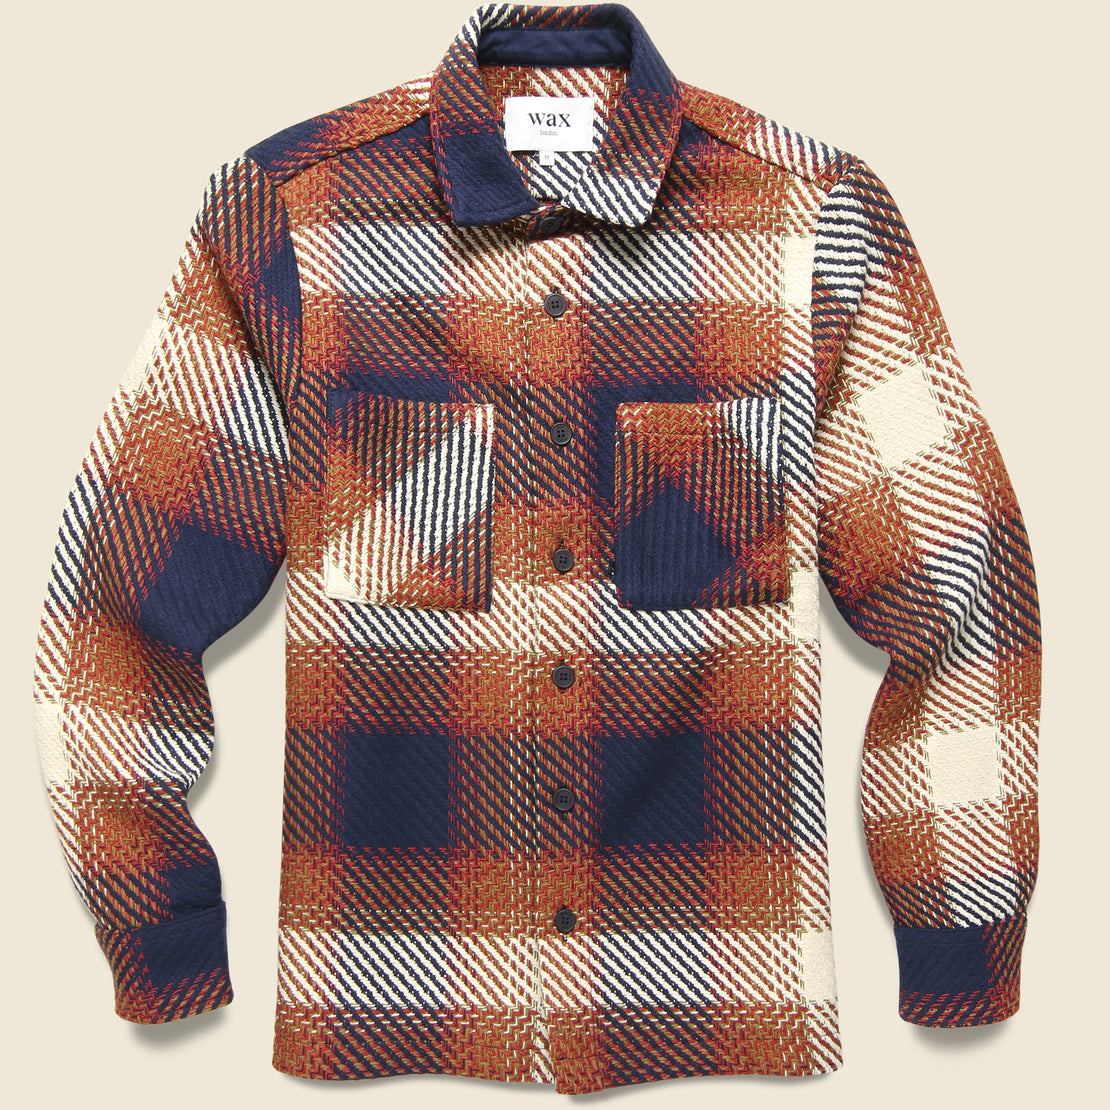 Wax London Whiting Overshirt - Navy/Red Ombre Check